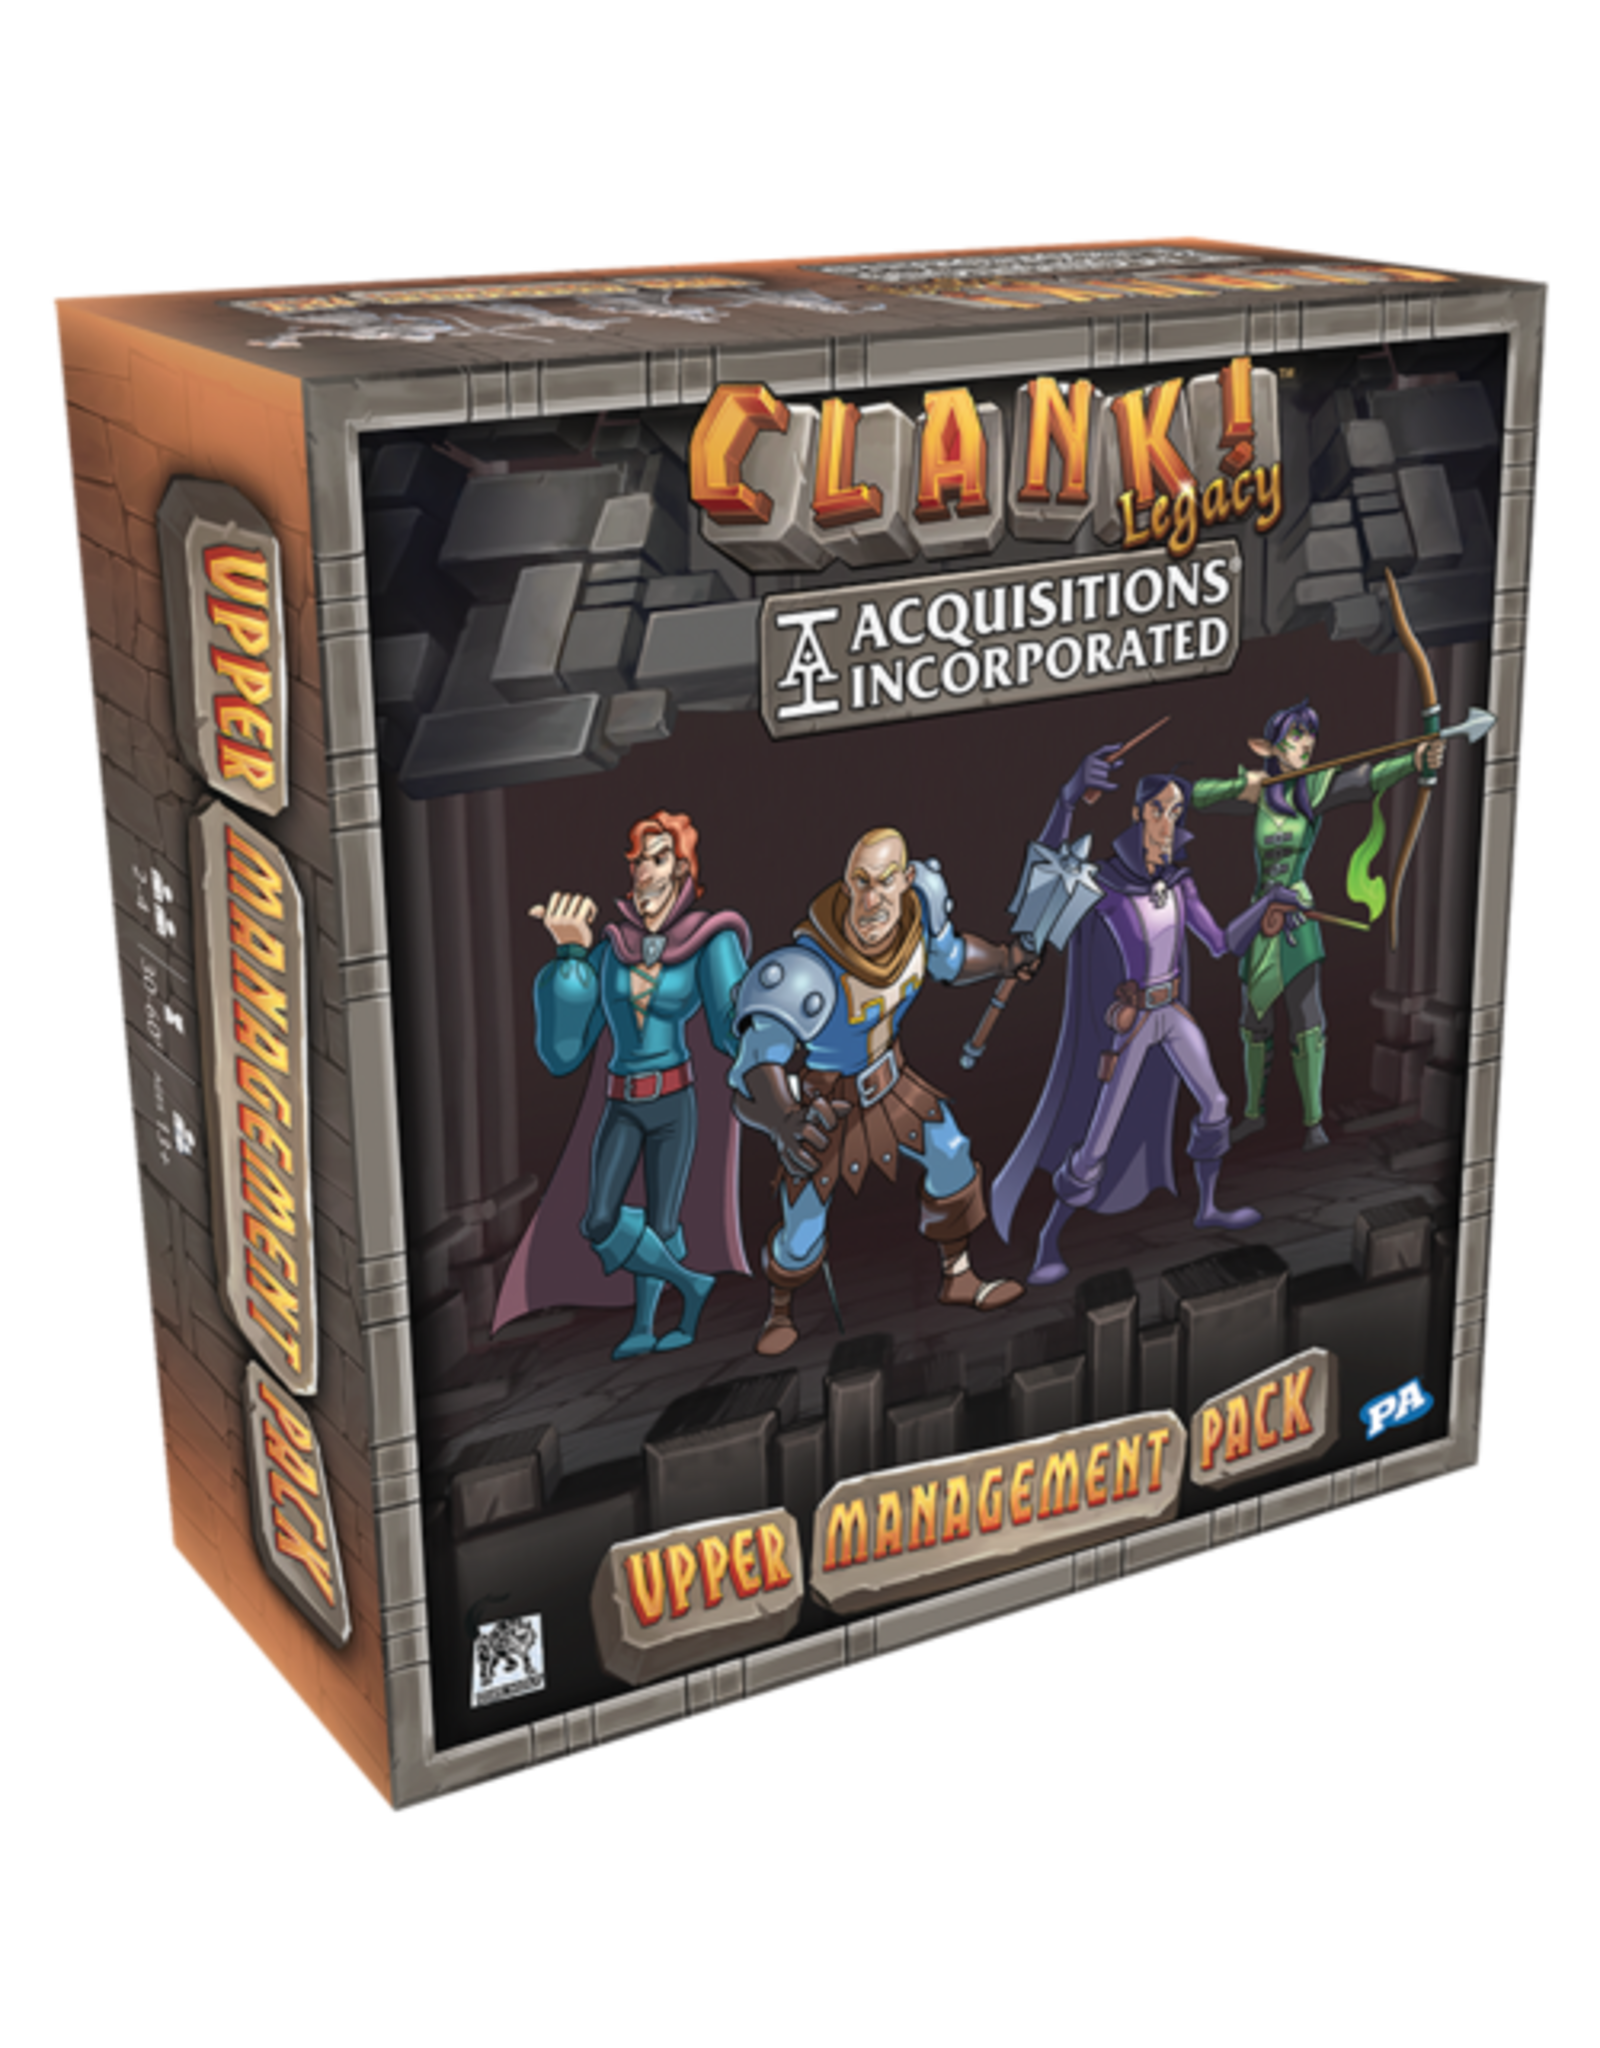 Direwolf Clank!: Acquisitions Incorporated Upper Managment